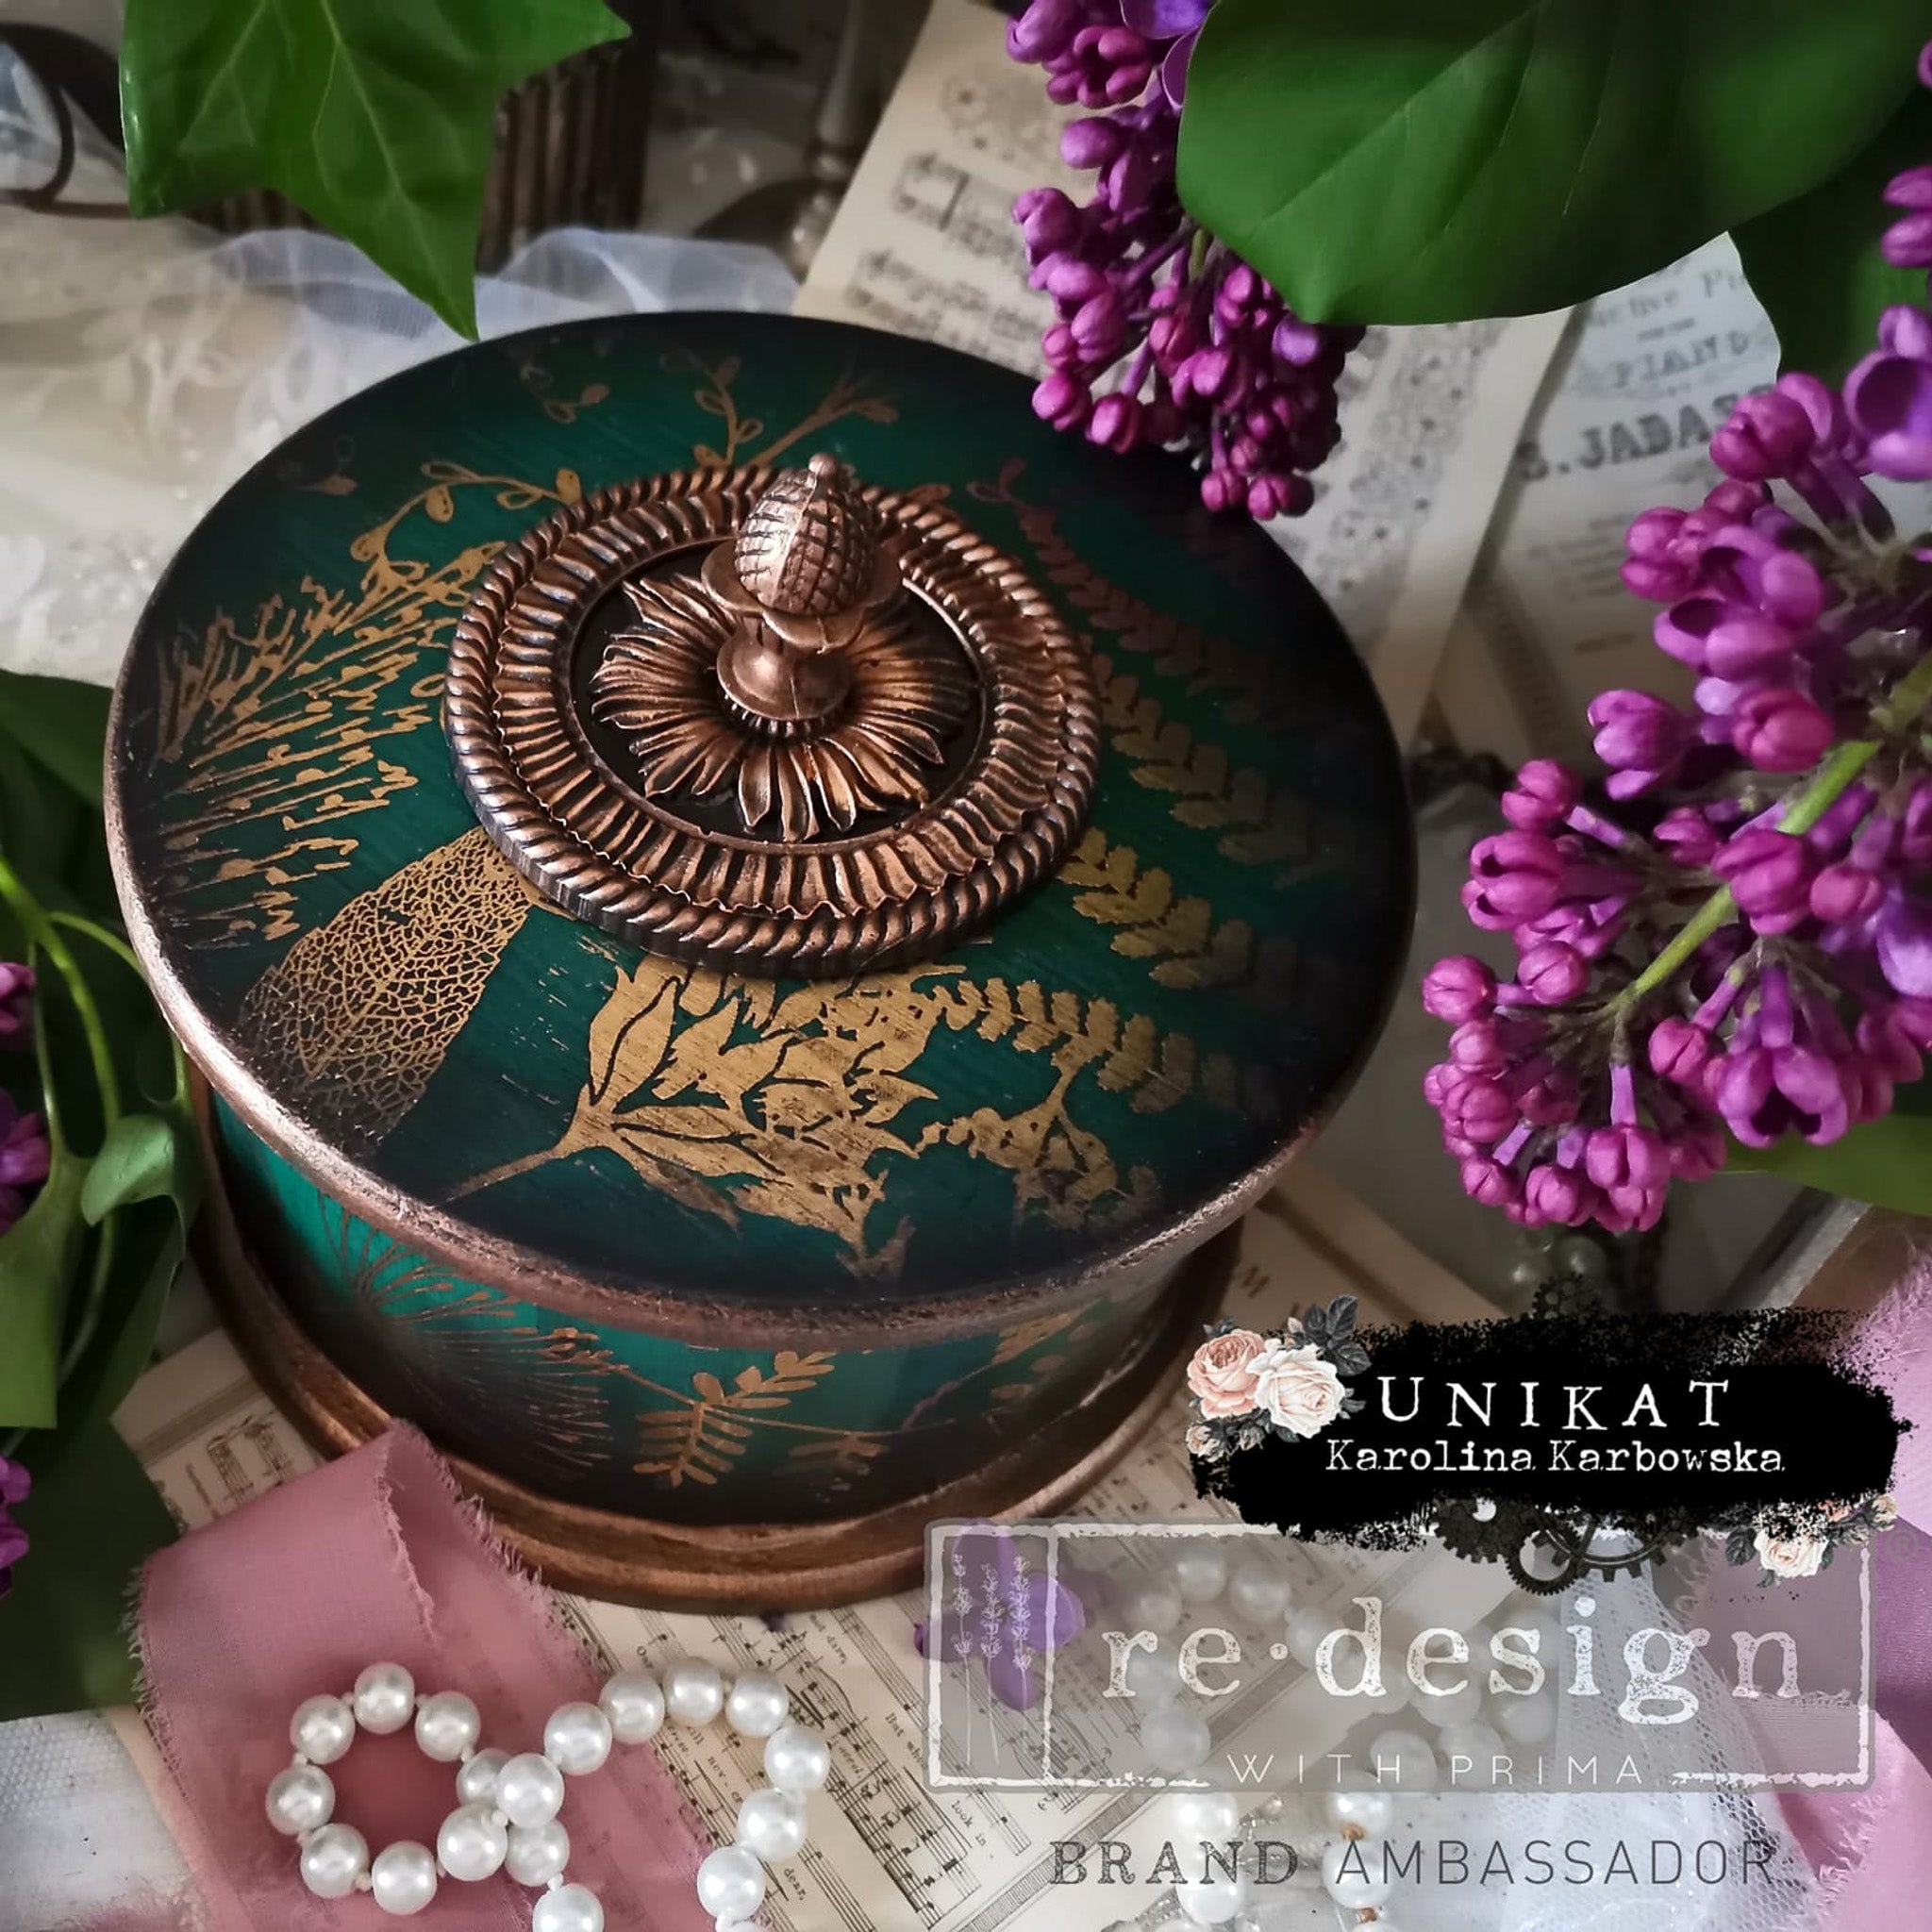 A cylindrical trinket box created by Unikat Karolina Karbowska is painted dark green with gold plants stenciling and features ReDesign with Prima's Soho Haven silicone mold on the top with a knob.